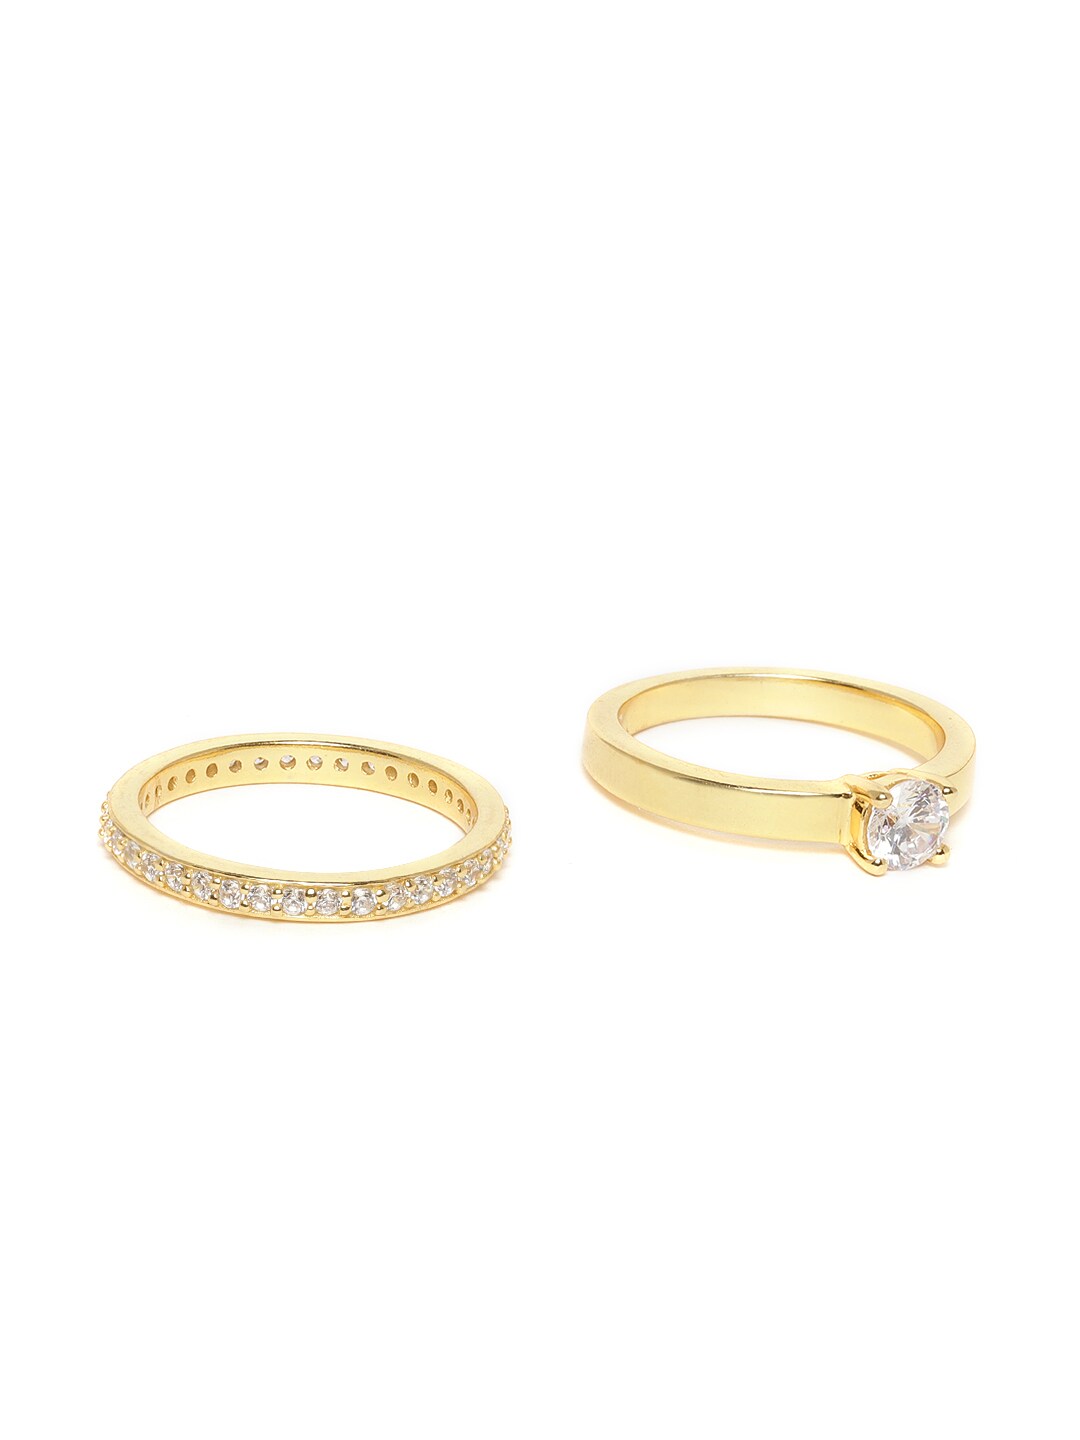 Carlton London Set of 2 Gold-Plated CZ Studded Handcrafted Couple Rings Price in India